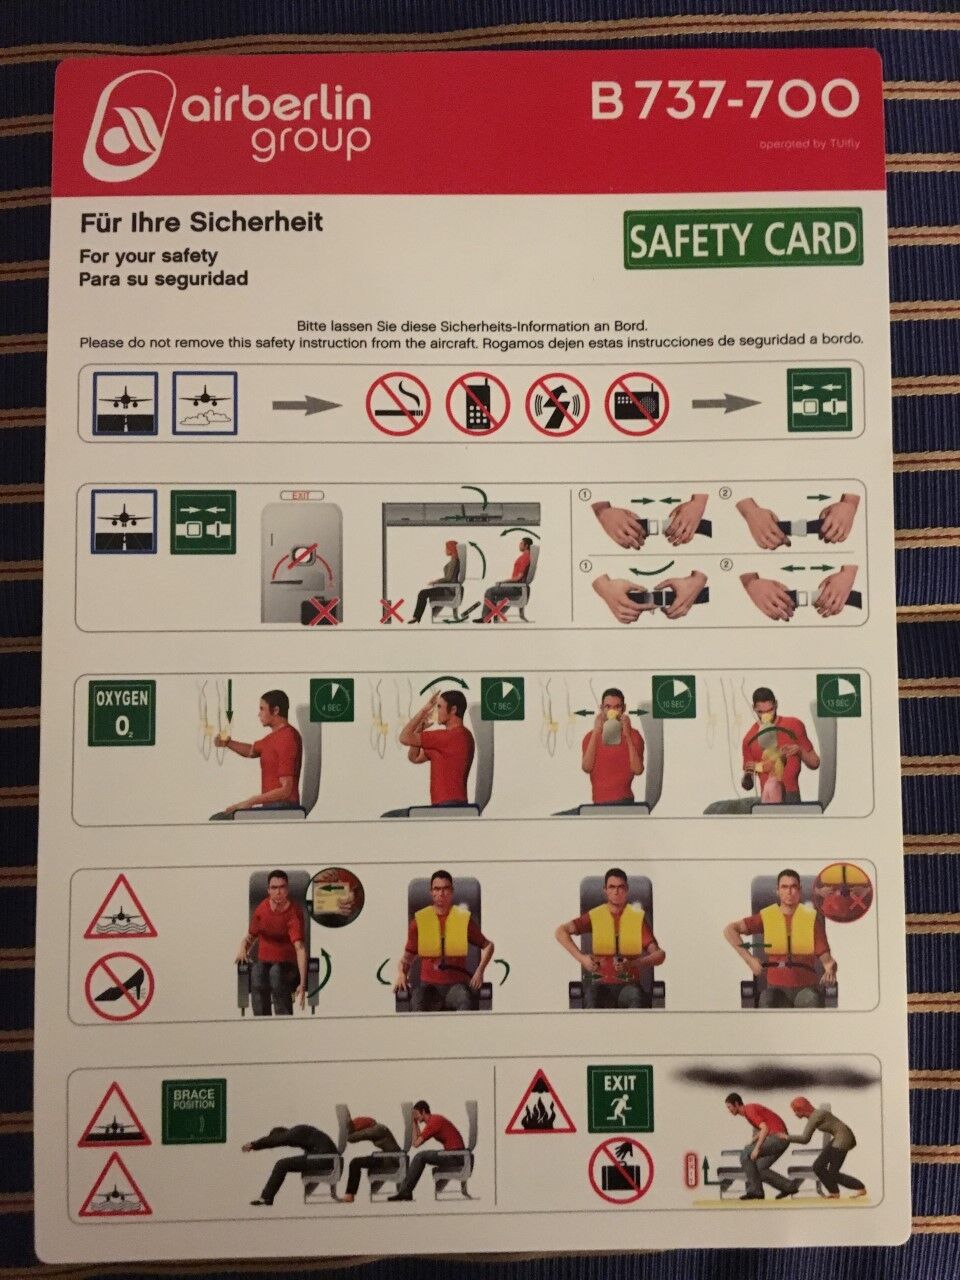 Air Berlin Boeing B737-700 Safety Card RARE Oneworld Airlines Germany